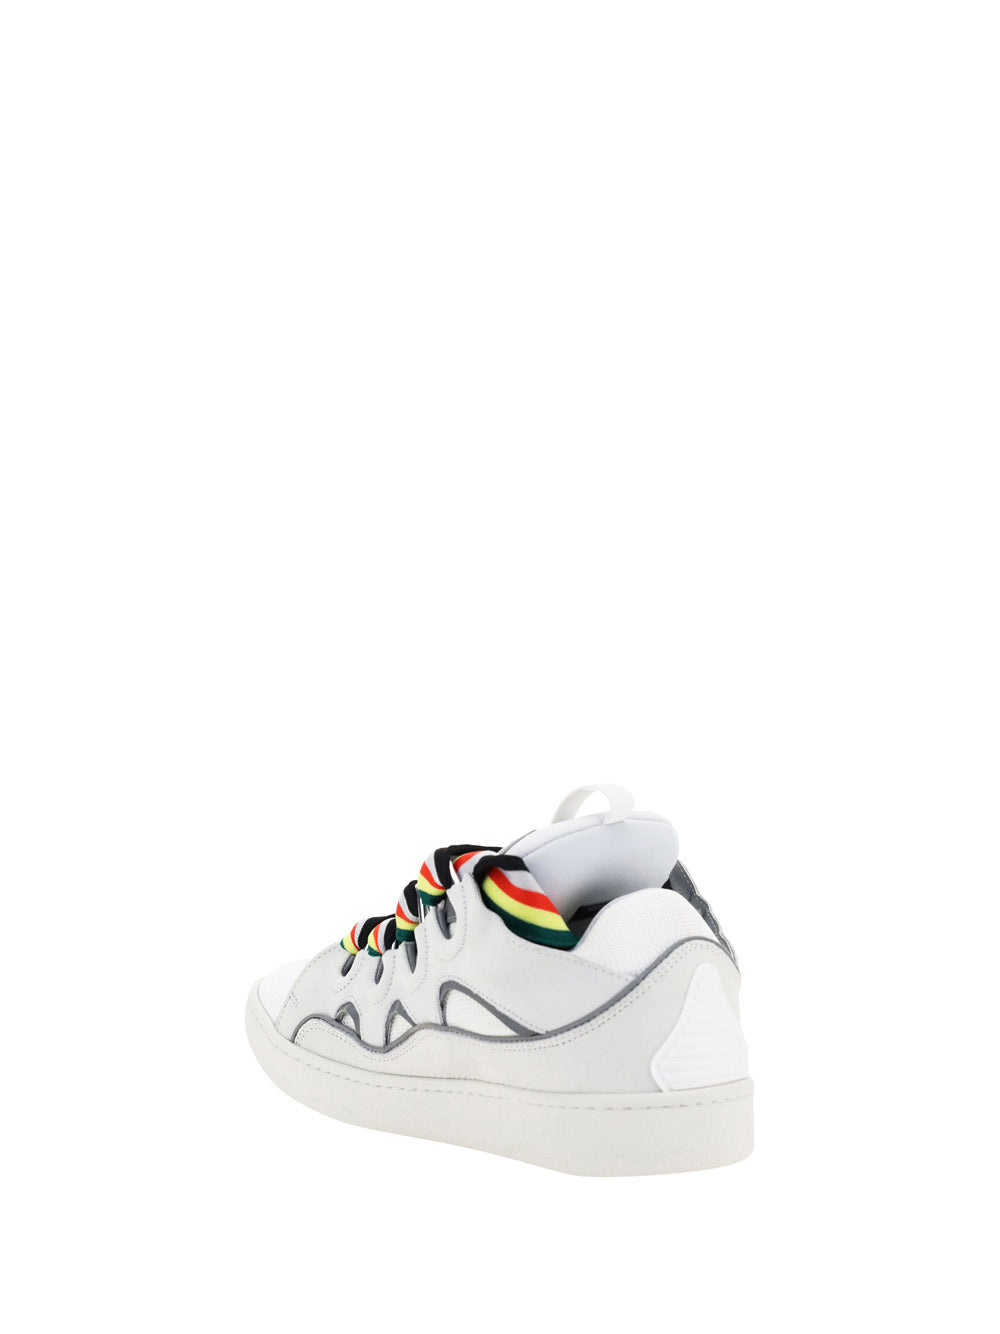 Leather Curb Sneakers - White